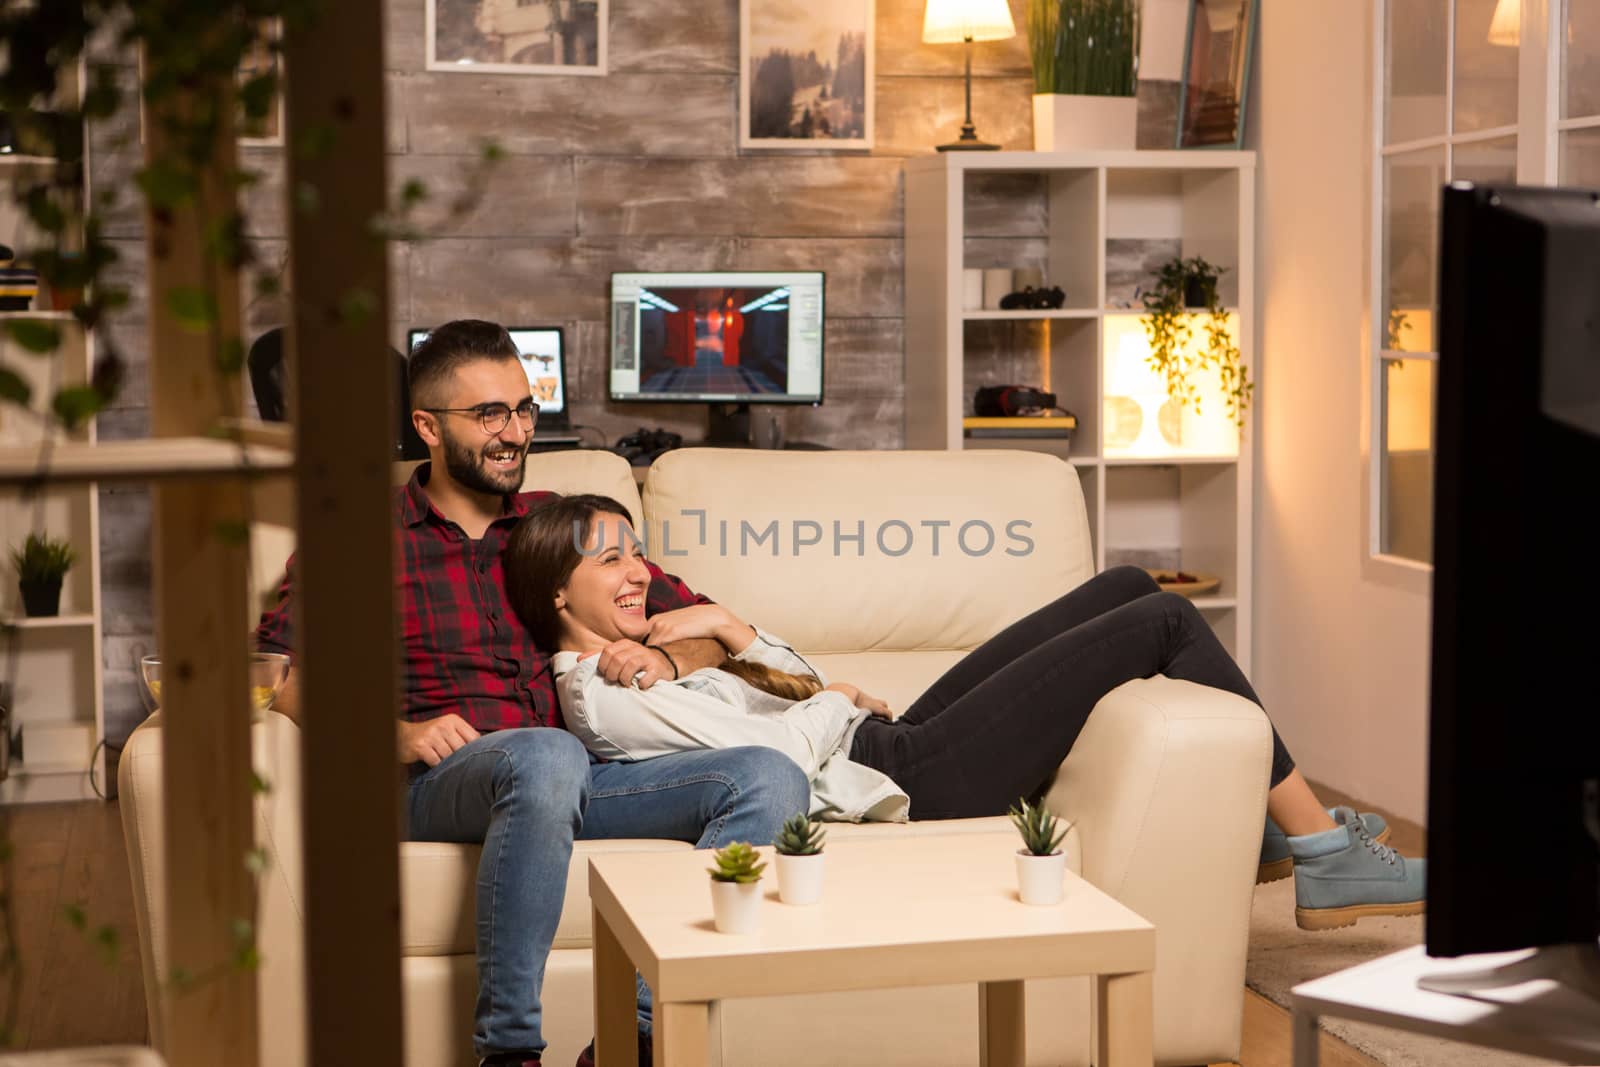 Lovely young couple relaxing on couch and watching a movie on tv at night.